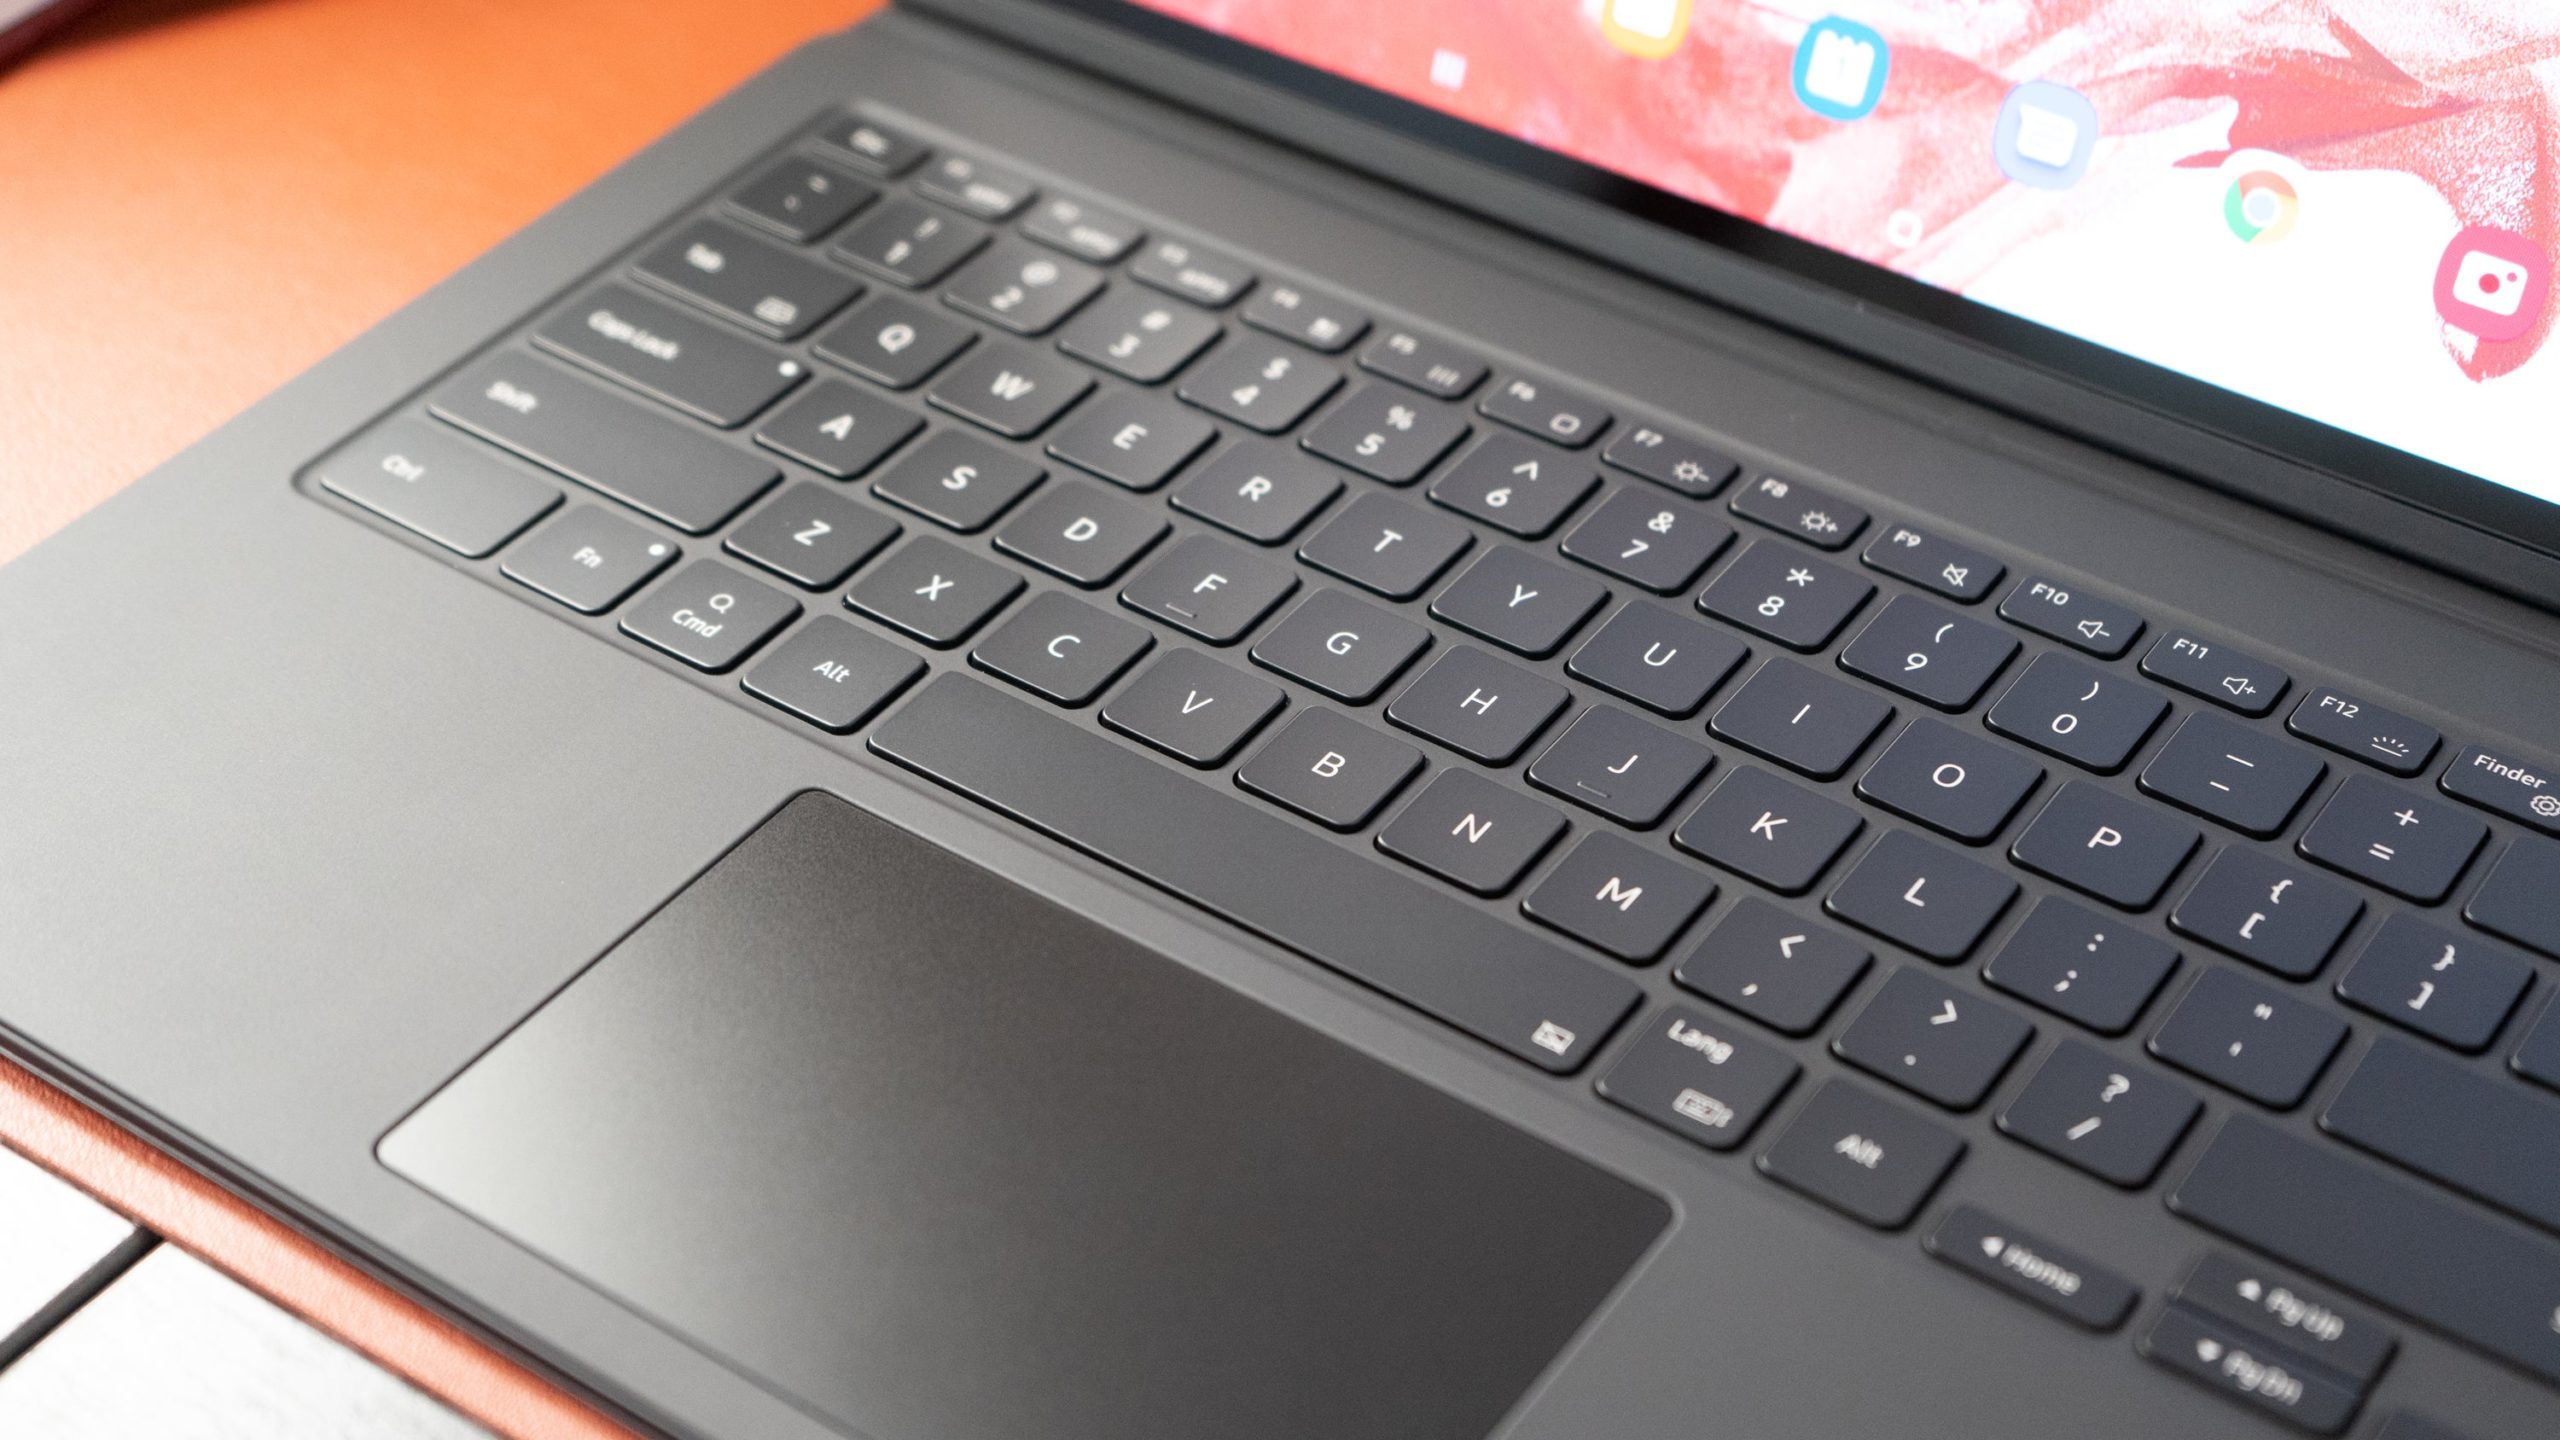 Samsung Galaxy Tab S8 Ultra's Book Cover Keyboard transforms this tablet into a laptop. (Photo: Florence Ion/Gizmodo)